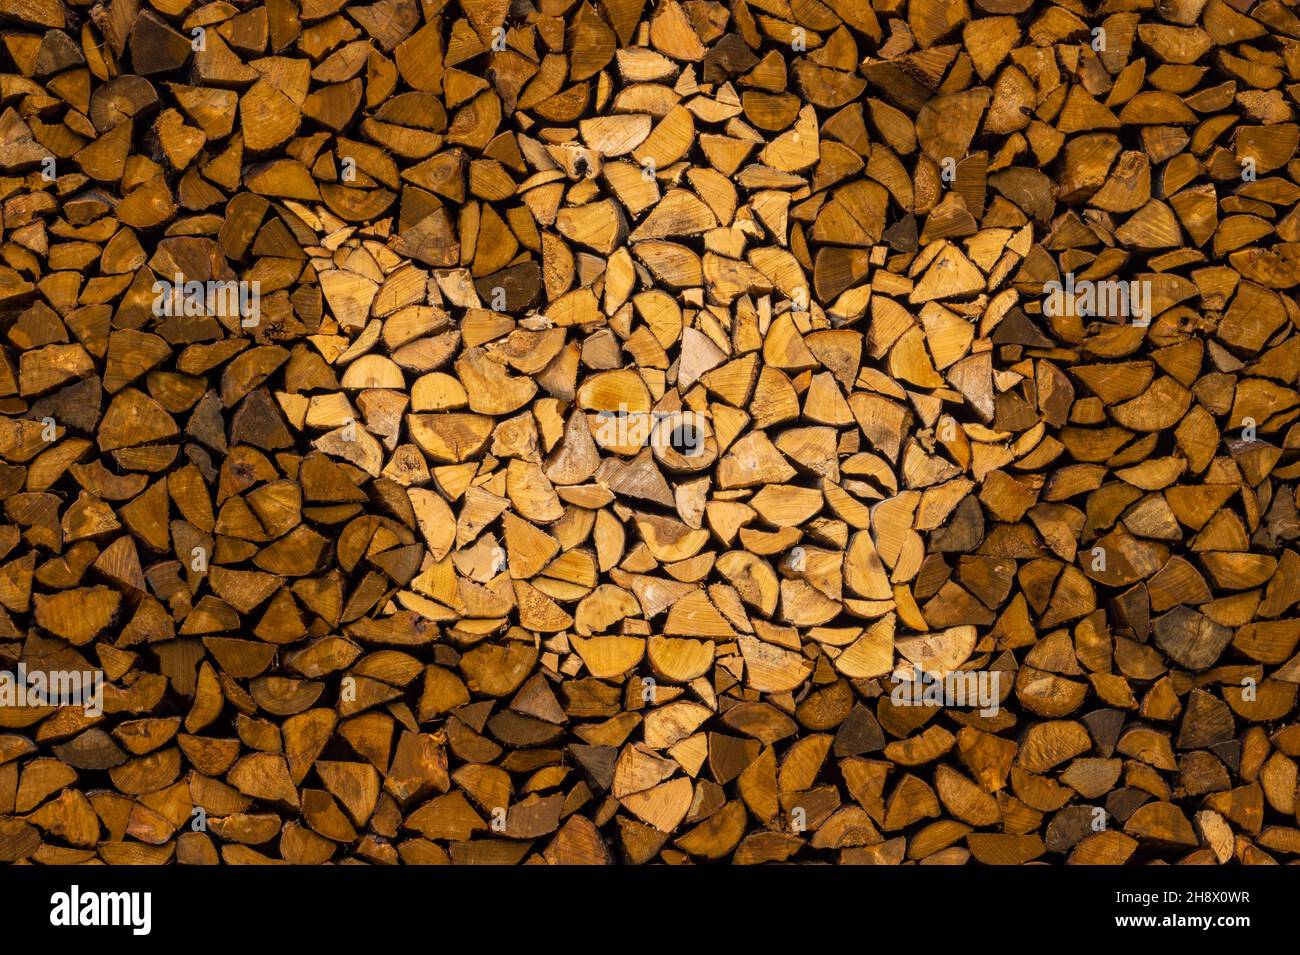 Maple leaf design in a woodpile at Wyckoff Family Maple sugar center, Jeffersonville, Vermont, USA Stock Photo